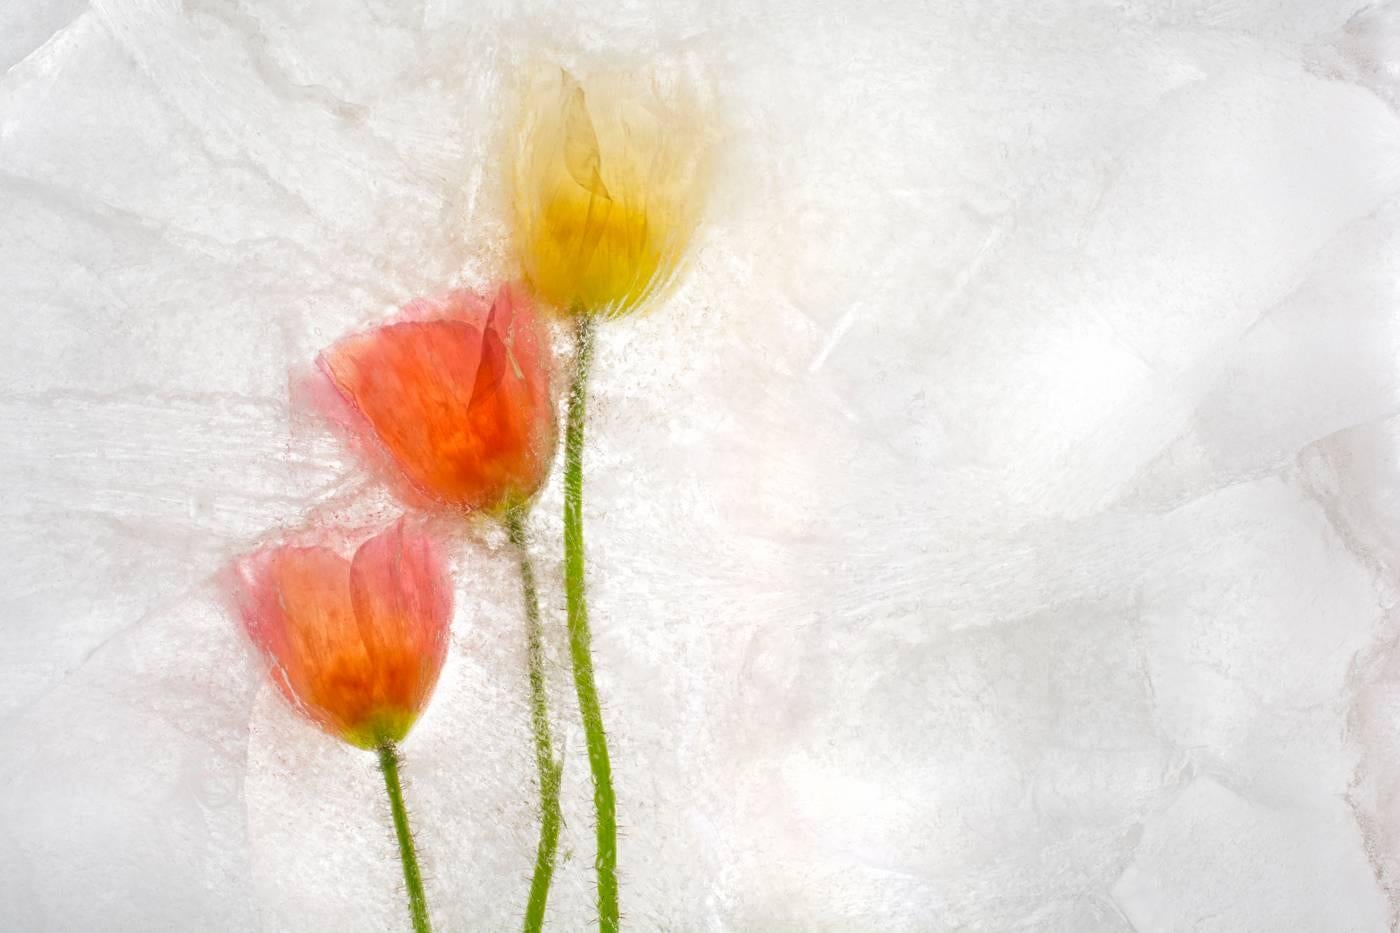 Ryuijie Still-Life Photograph - Color Ice Form 177